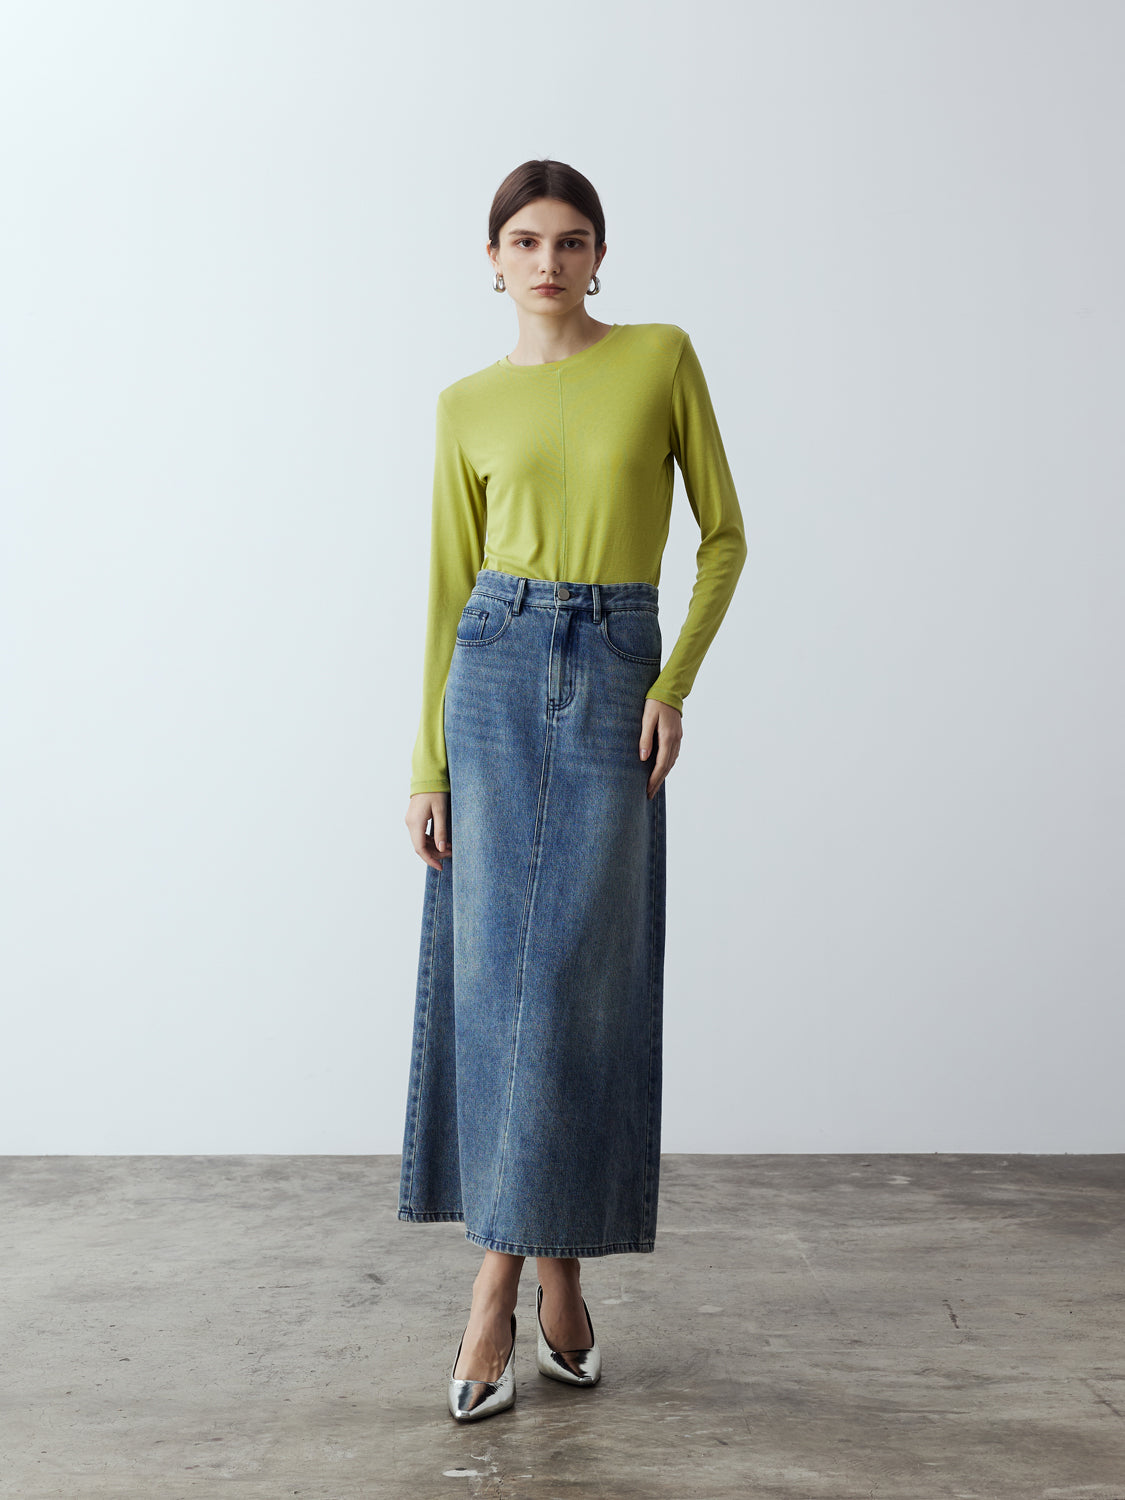 lime : Model is wearing the Fitted Long Sleeve T-Shirt in Lime, which comes with a rounded crew neckline and a centre front stitch line. Arm-hugging but gives a relaxed bodice. Worn with Denim Maxi Skirt and metallic silver heels.